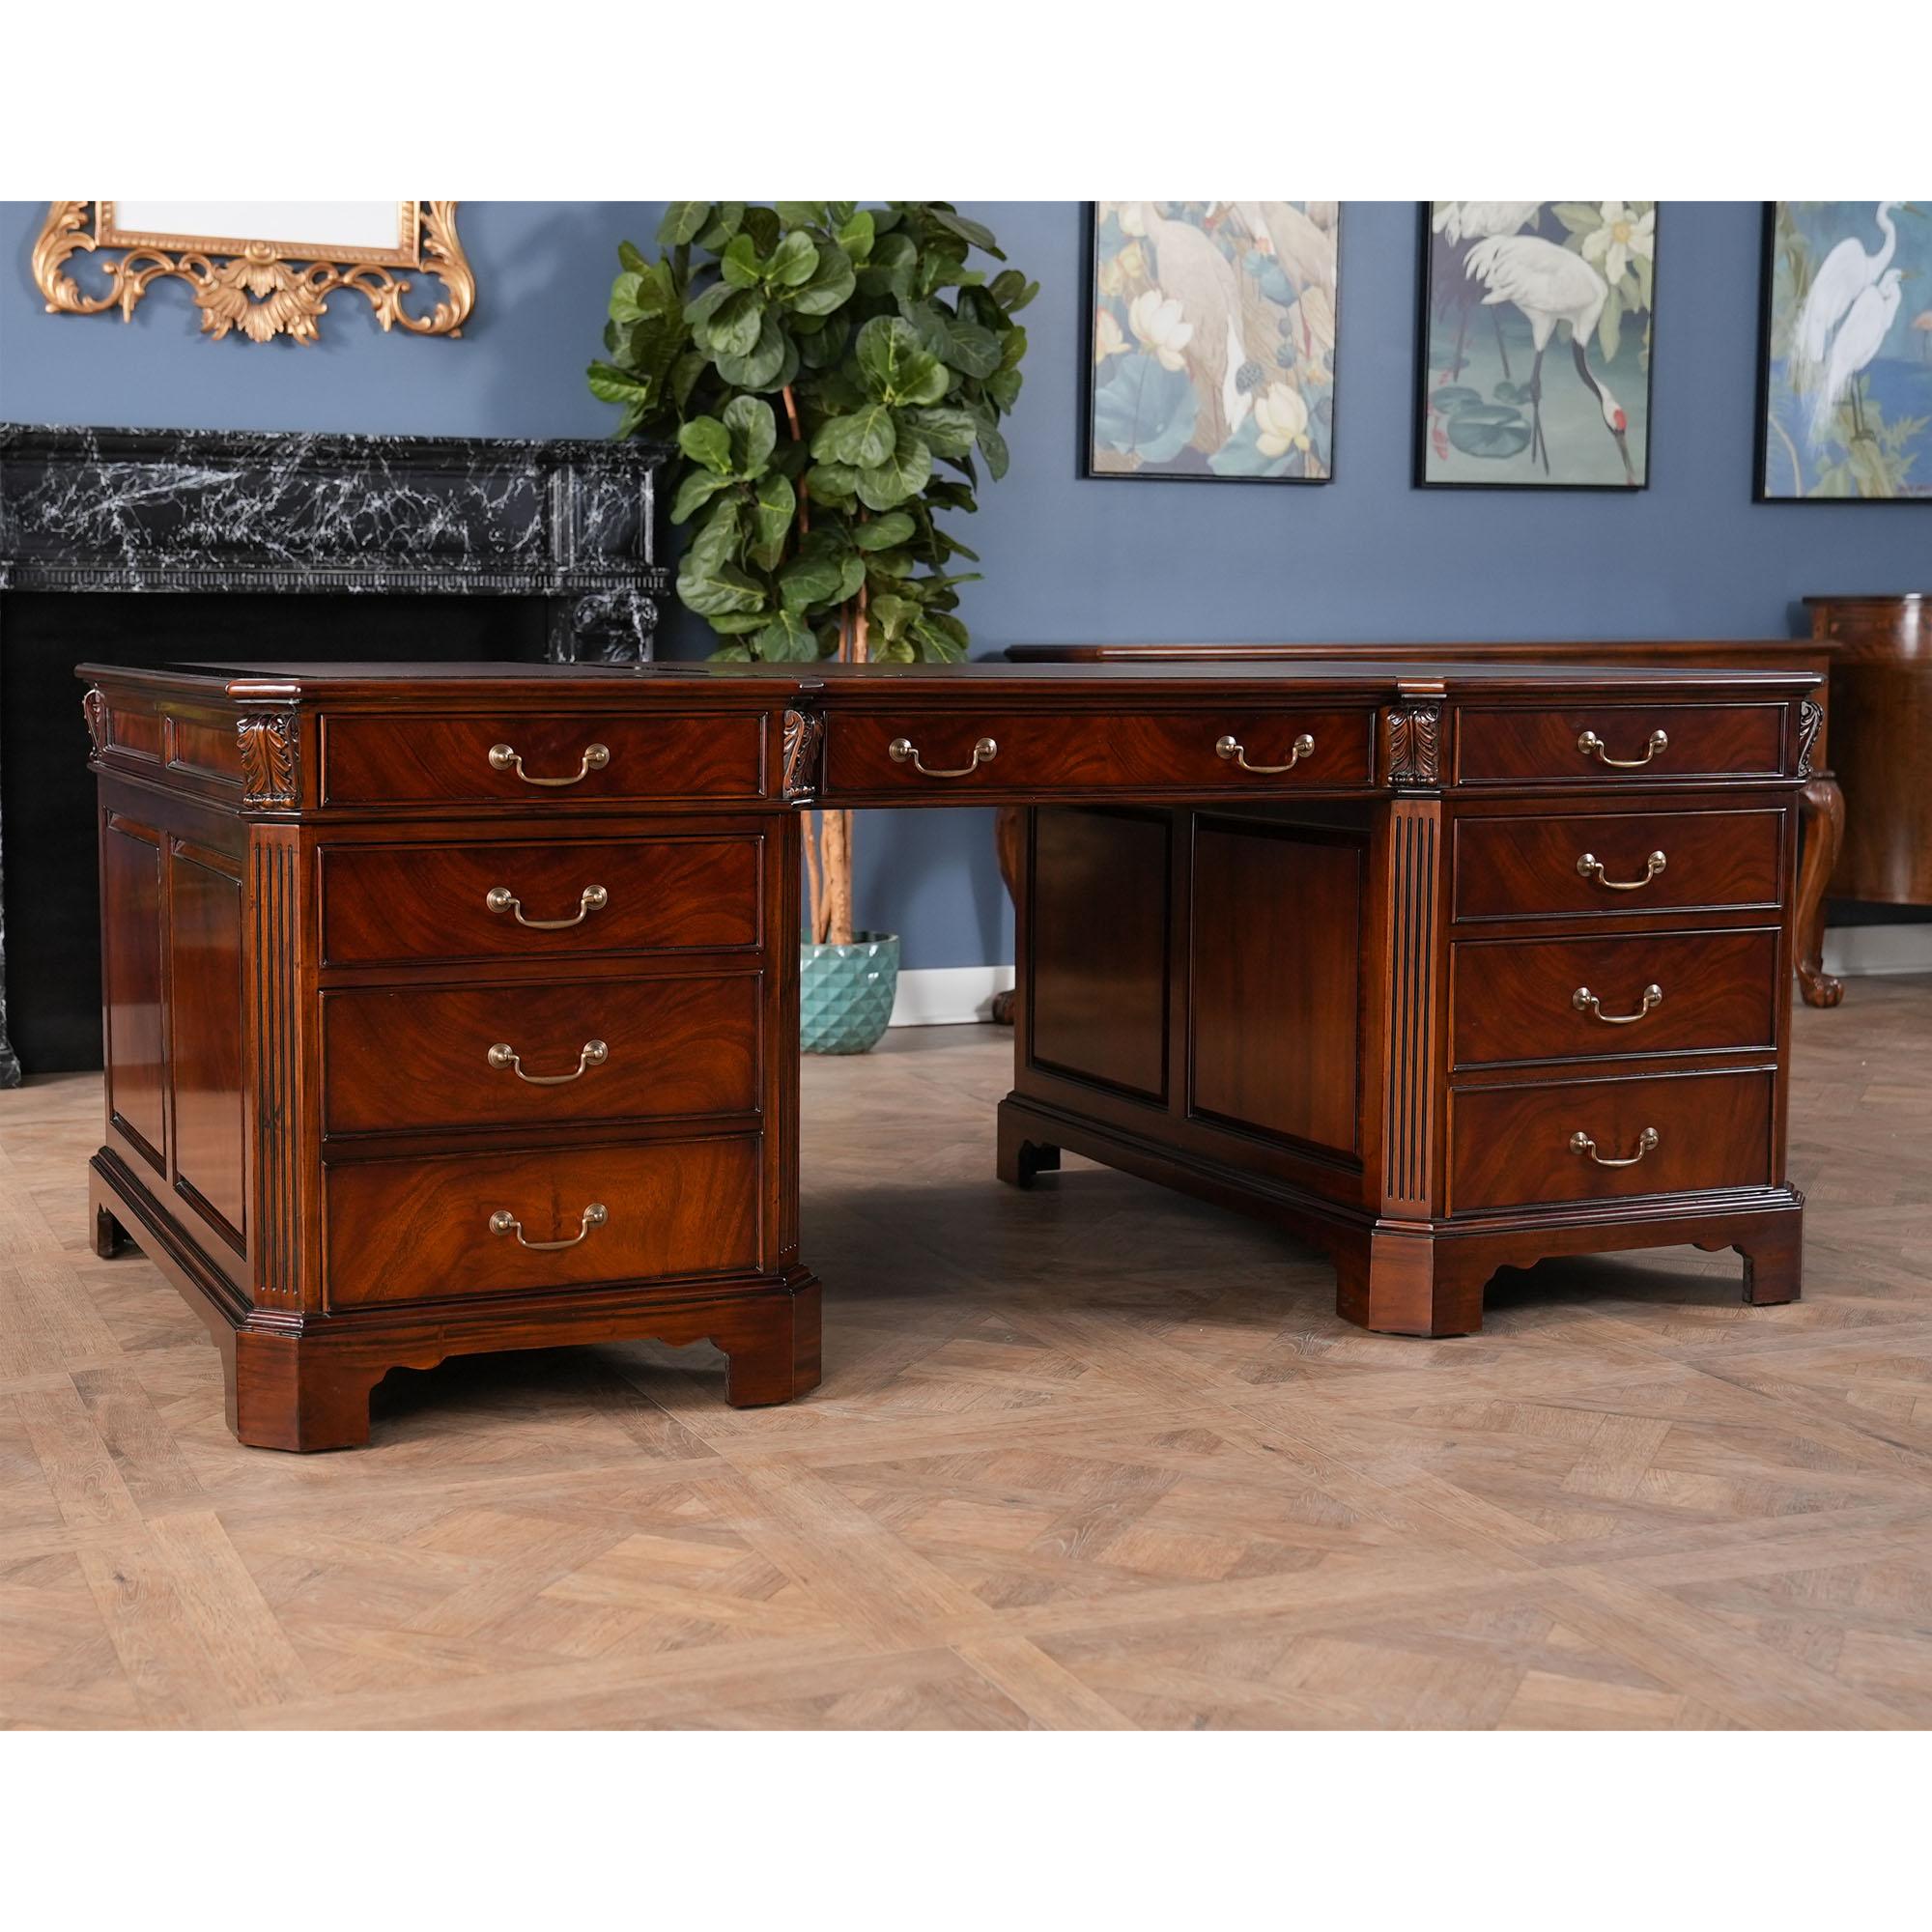 Large Mahogany Partner Desk In New Condition For Sale In Annville, PA